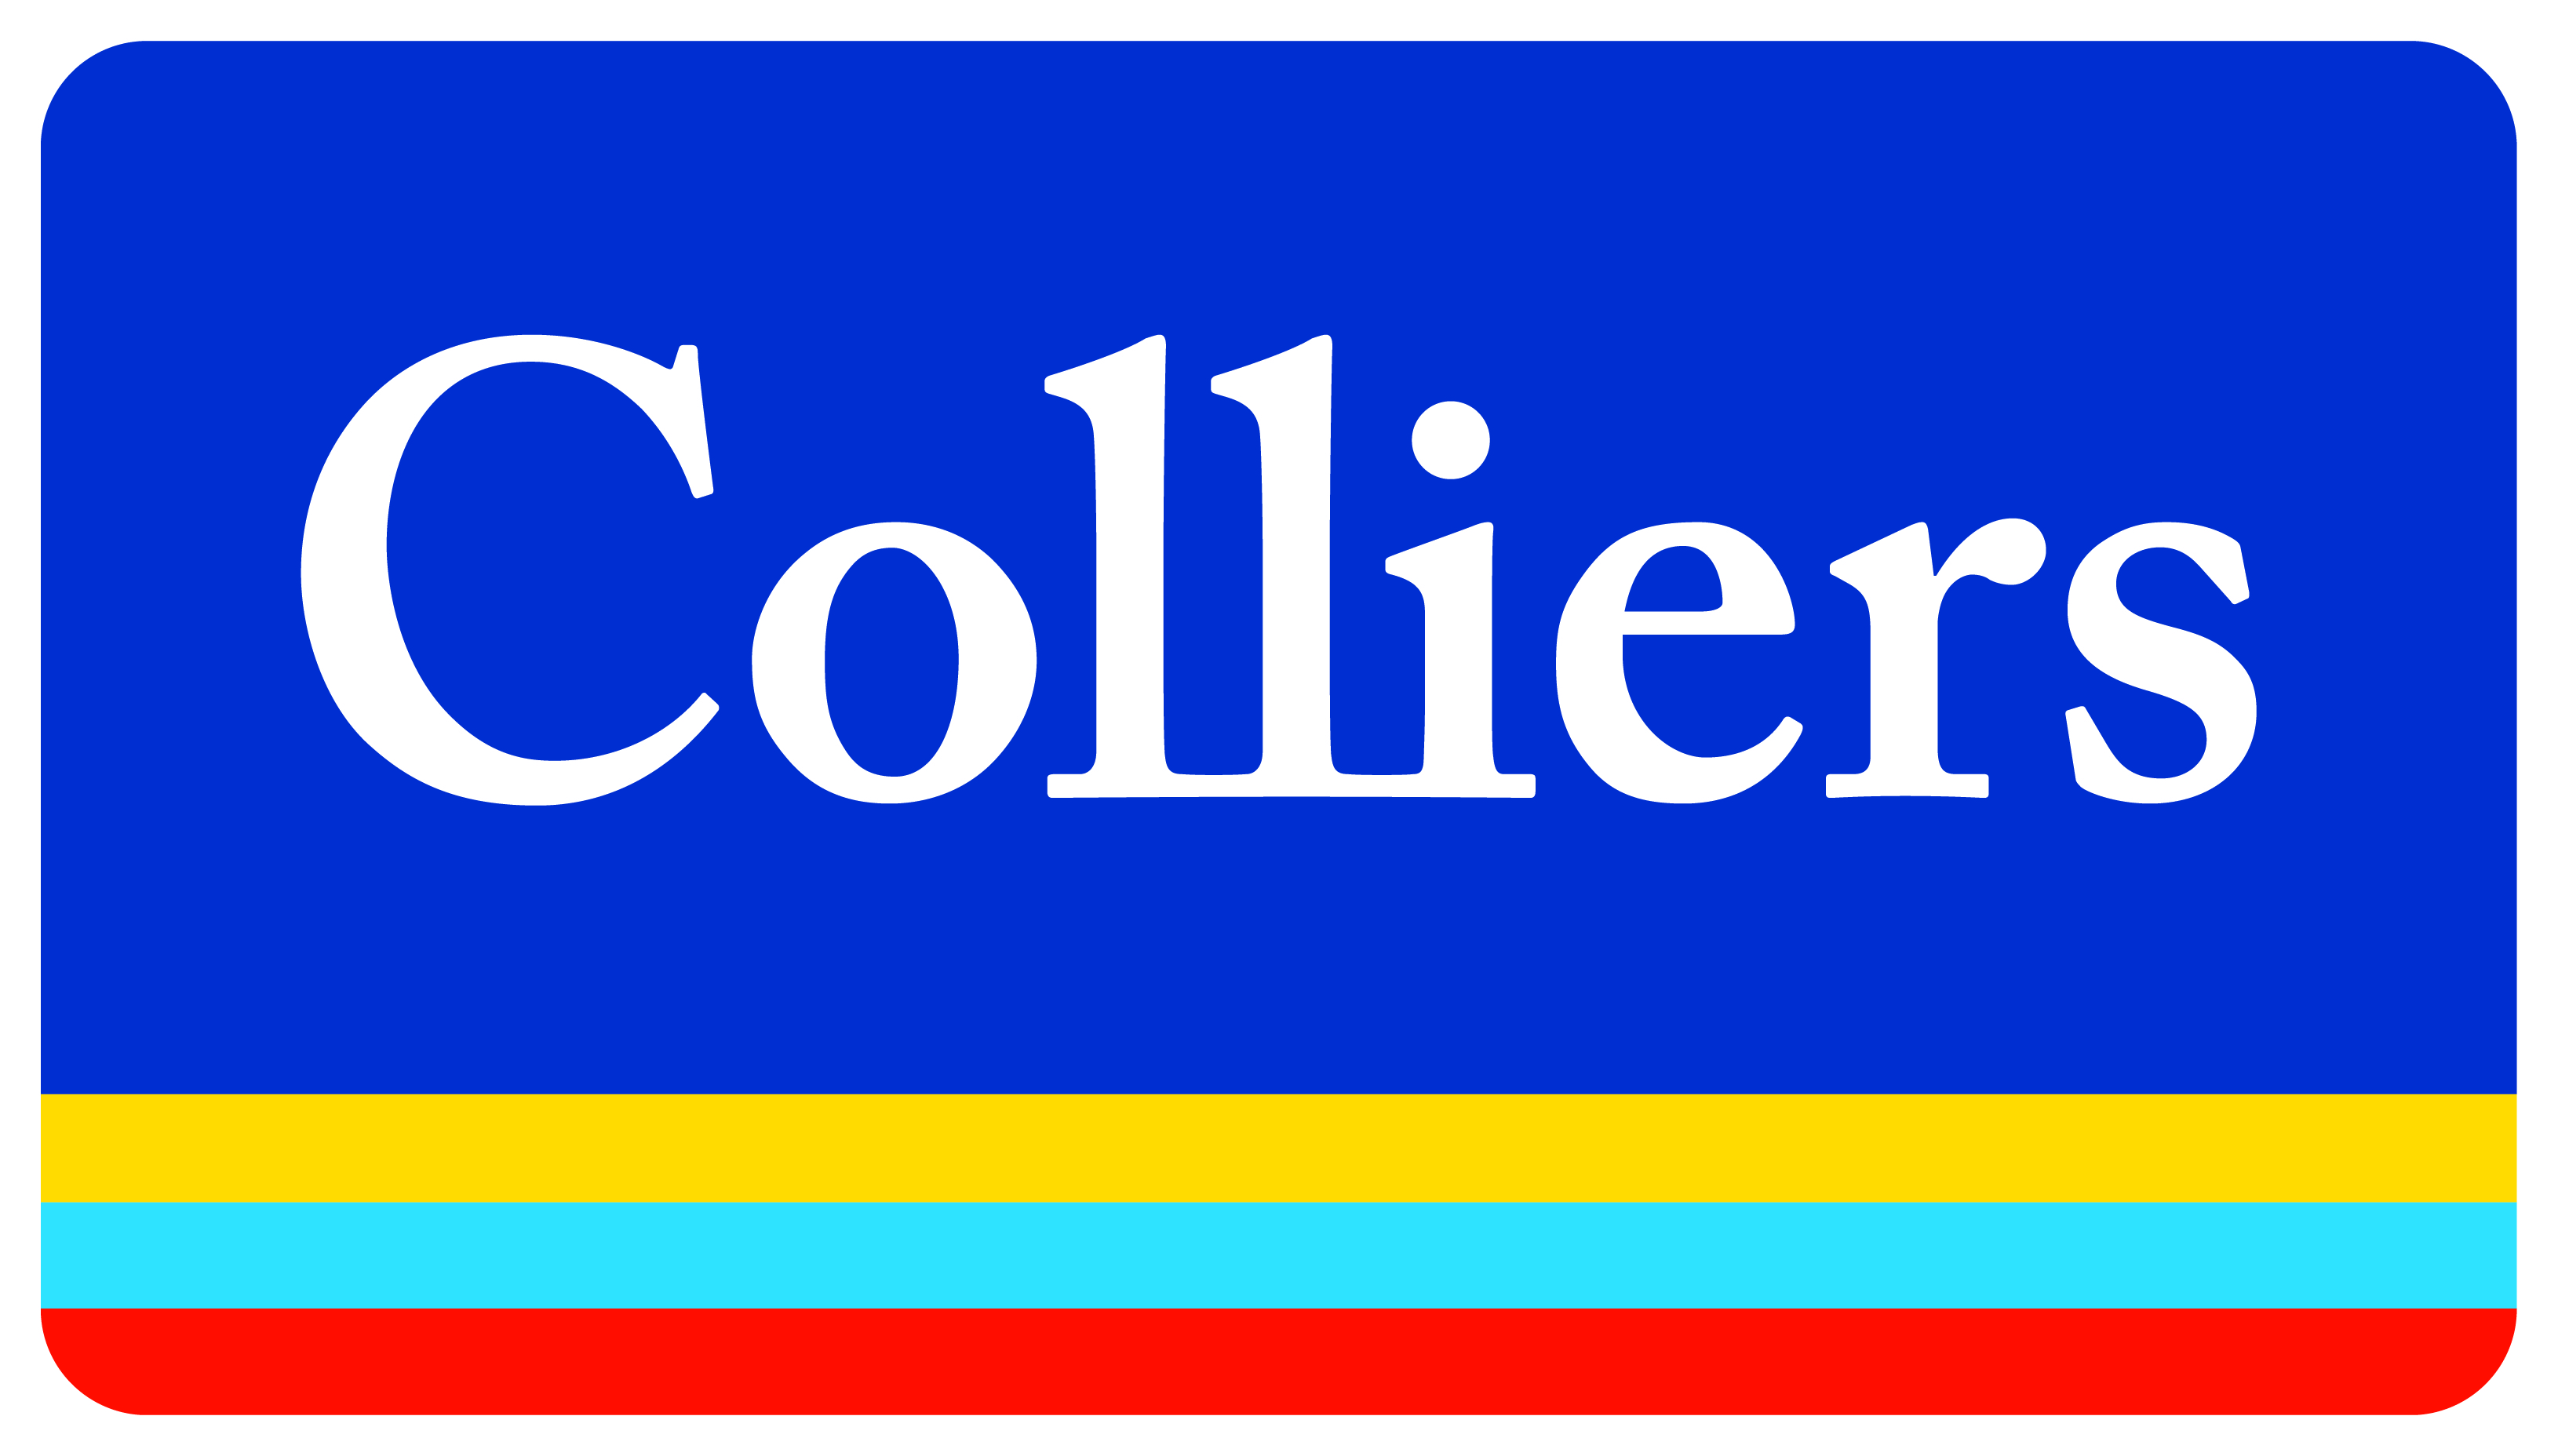 Colliers (Silver)